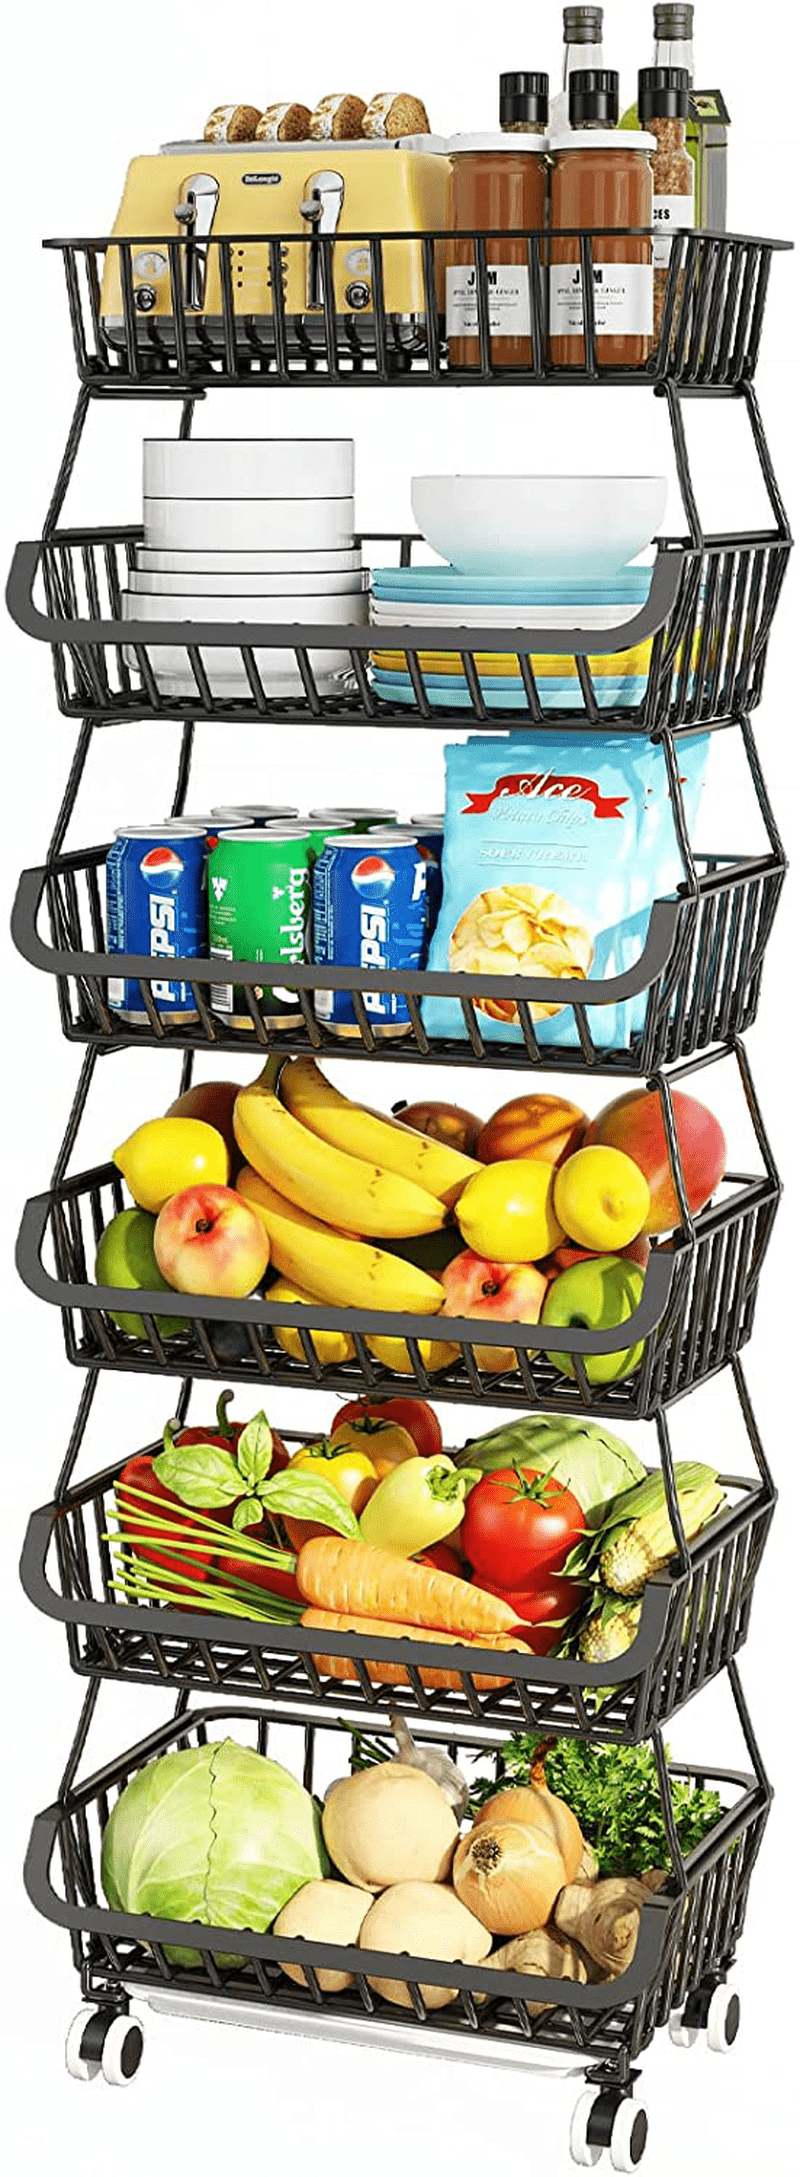 6 Tier Fruit Basket for Kitchen, Fruit and Vegetable Storage Cart Stackable Wire Baskets with Wheels Vegetable Produce Basket Potato Onion Storage Bins Rack for Kitchen Pantry